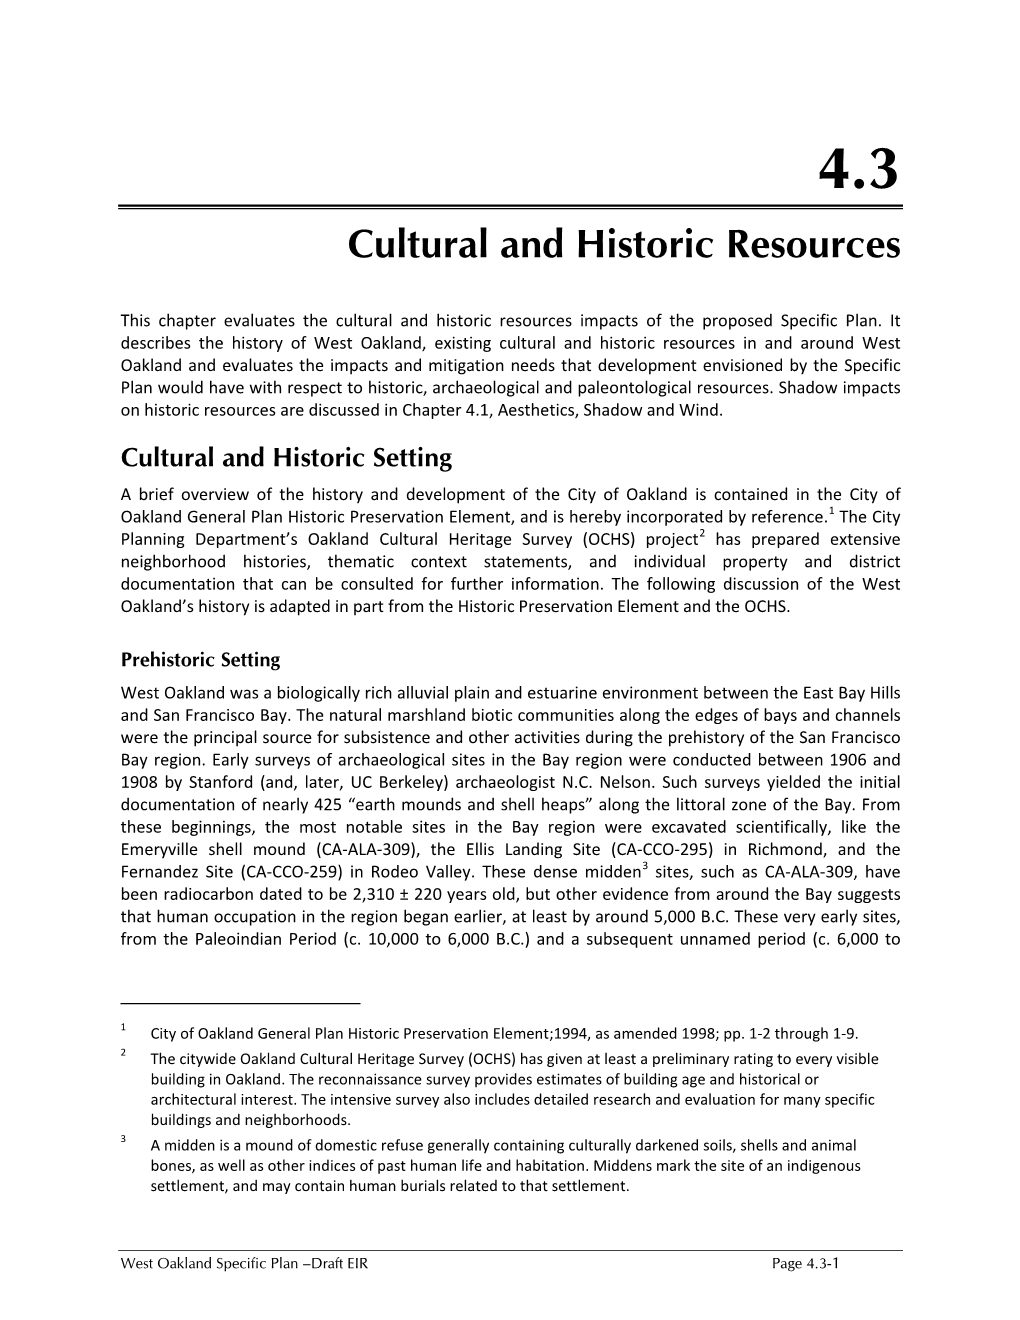 Cultural and Historic Resources